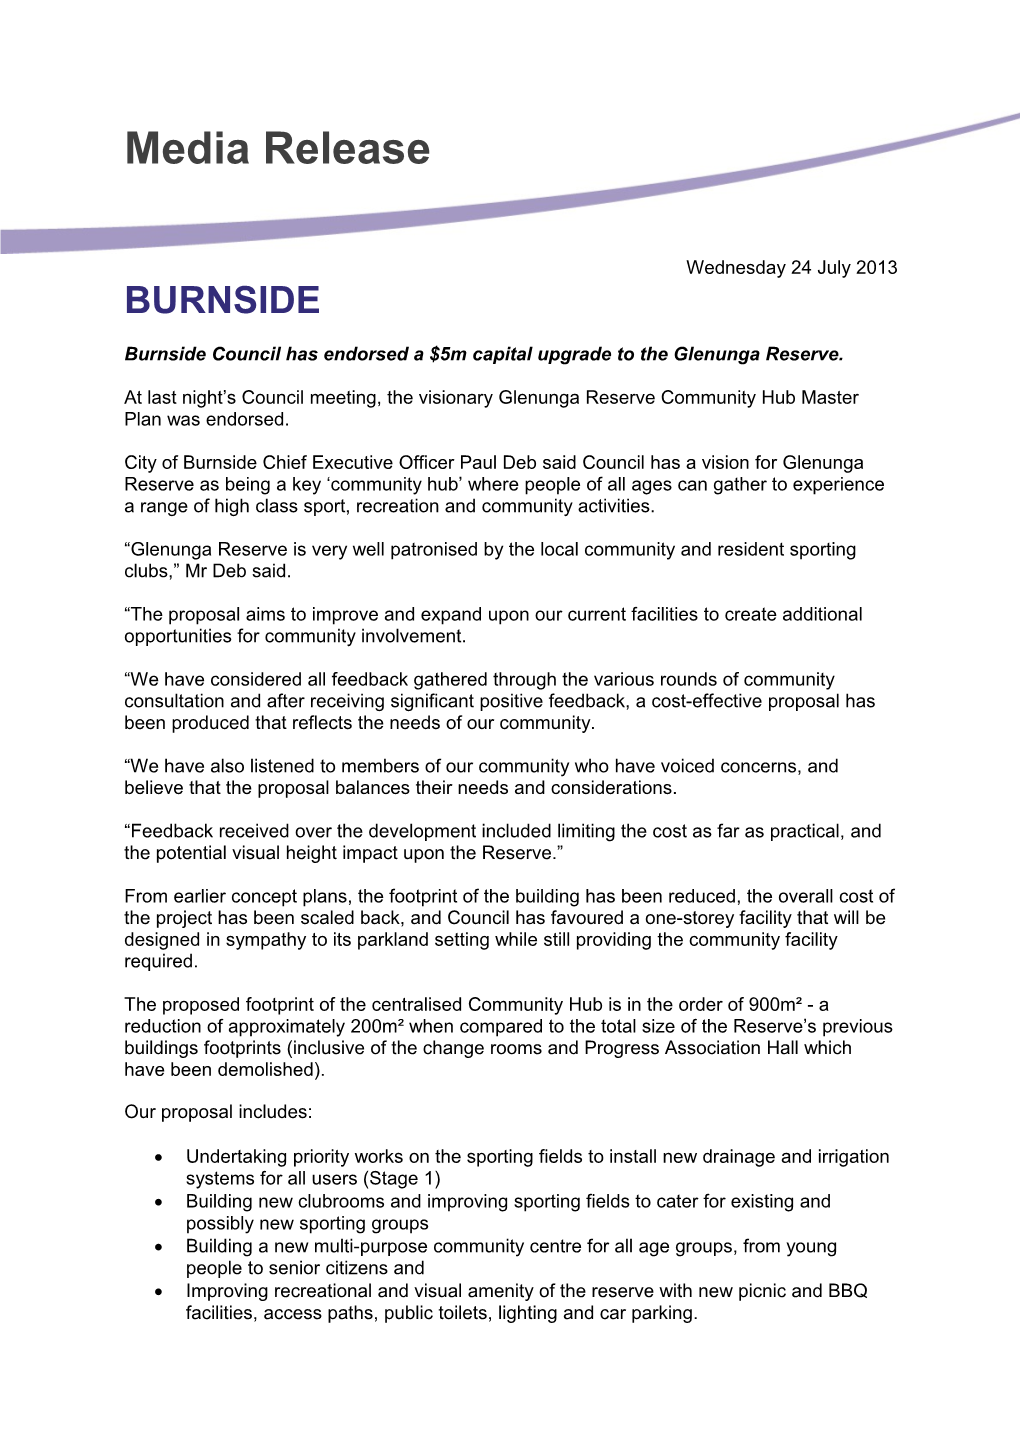 Burnside Council Has Endorsed a $5M Capital Upgrade to the Glenunga Reserve